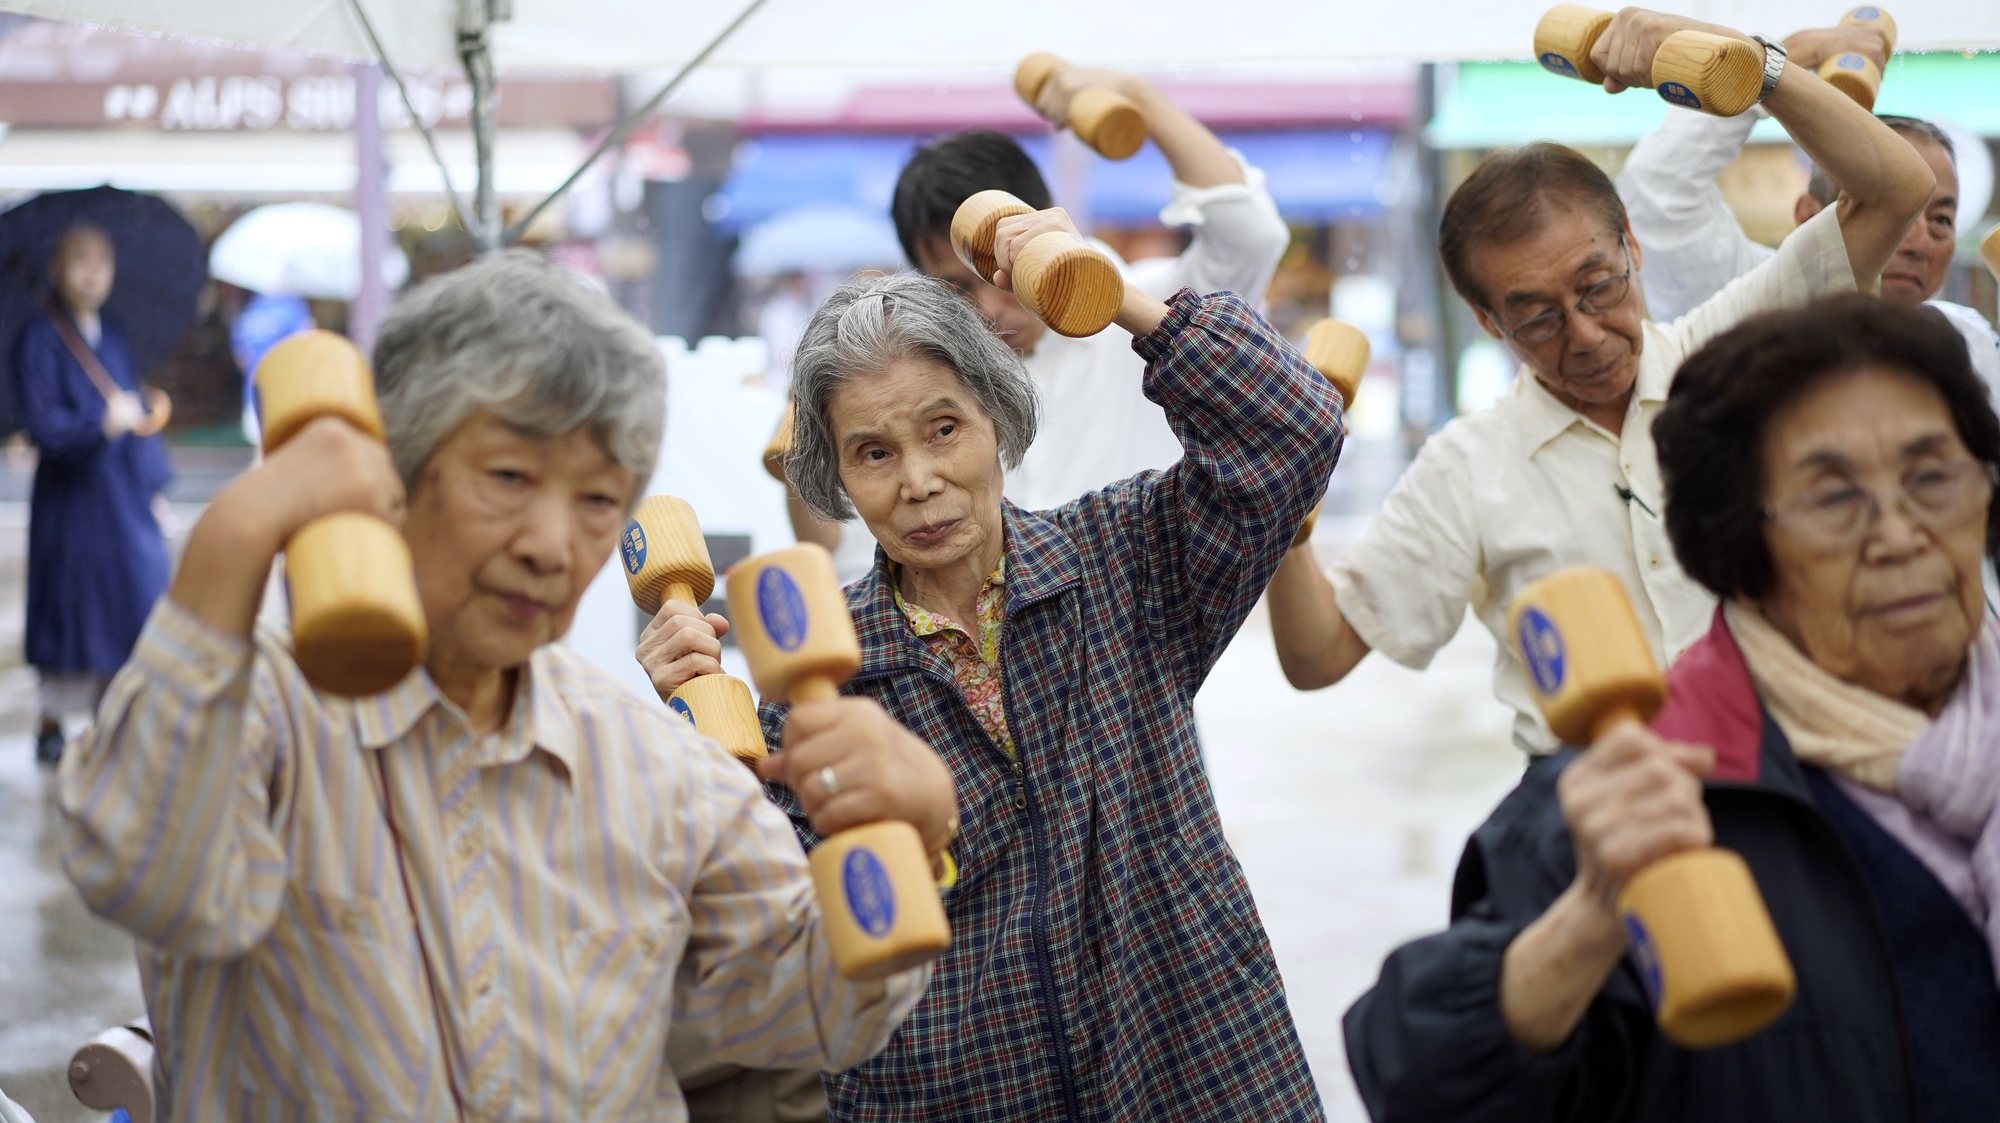 epaselect epa07845862 Elderly people practice physical activity with wooden dumbbells during an event marking the &#039;Respect for the Aged Day&#039; in Tokyo, Japan, 16 September 2019. According to government data released on 15 September, 35.88 million people are aged 65 or older in Japan, representing a record 28.4 percent of the population. Japan has the oldest population in the world.  EPA/FRANCK ROBICHON